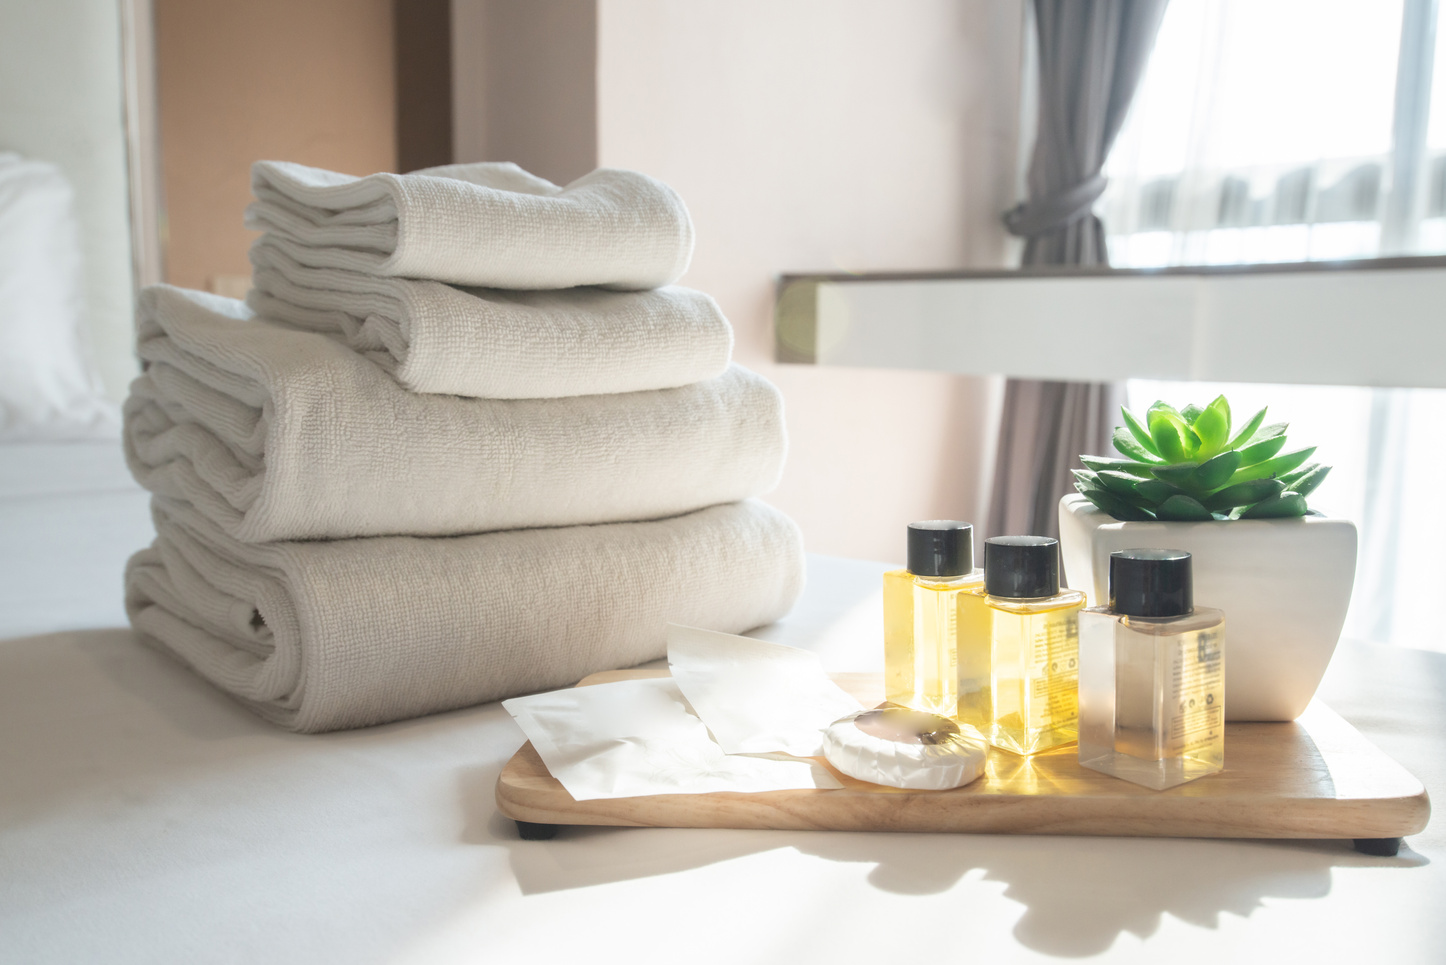 Set of hotel amenities (such as towels, shampoo, soap etc) on the bed.